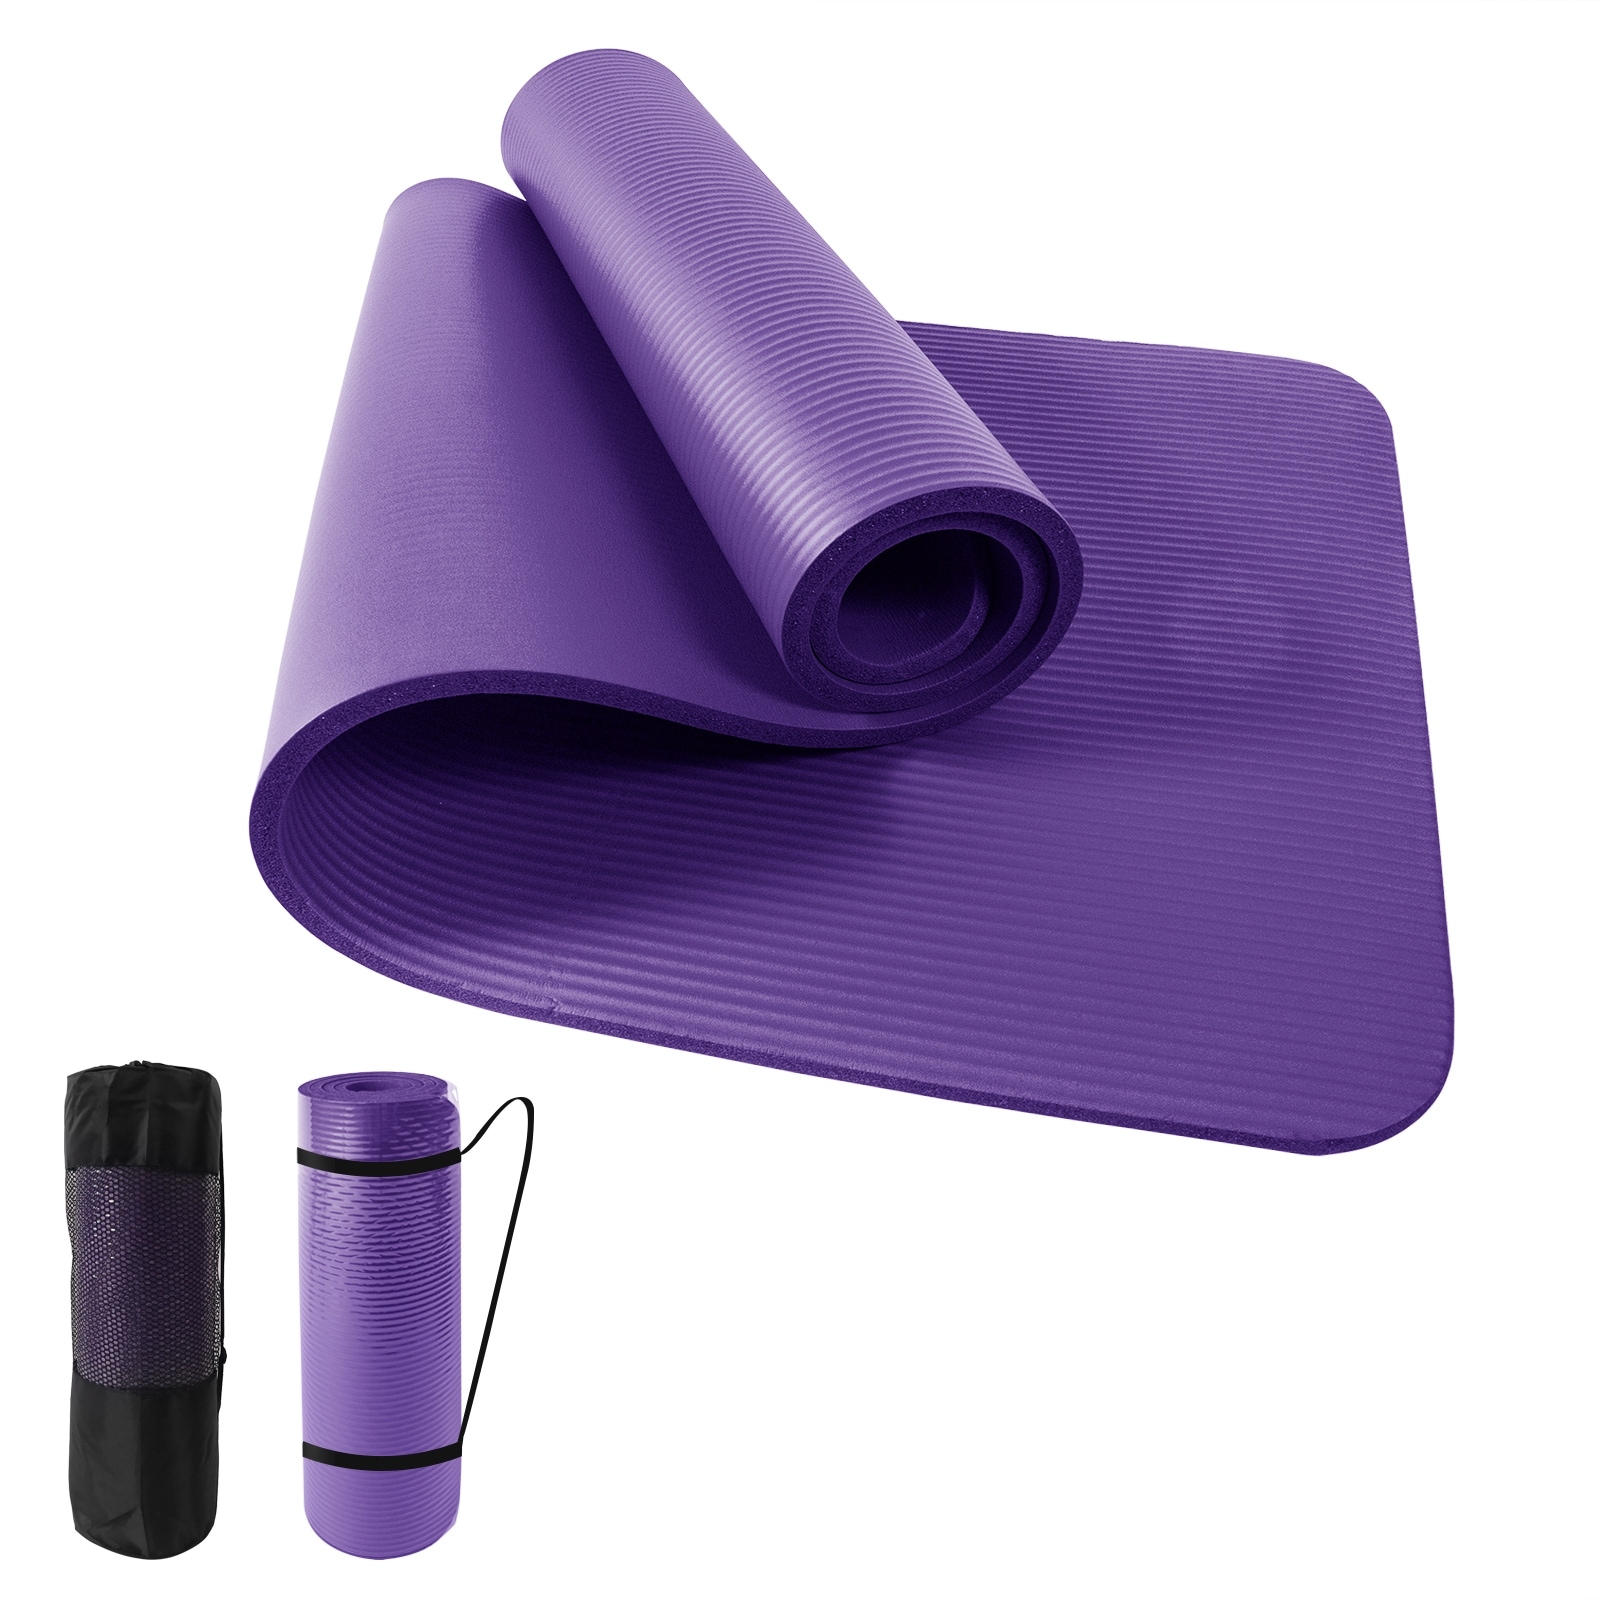 Pro Space High Density Yoga Mat 72 in. L x 24 in. W x 0.6 in. Pilates  Exercise Mat Non Slip (12 sq. ft.) - On Sale - Bed Bath & Beyond - 38330829